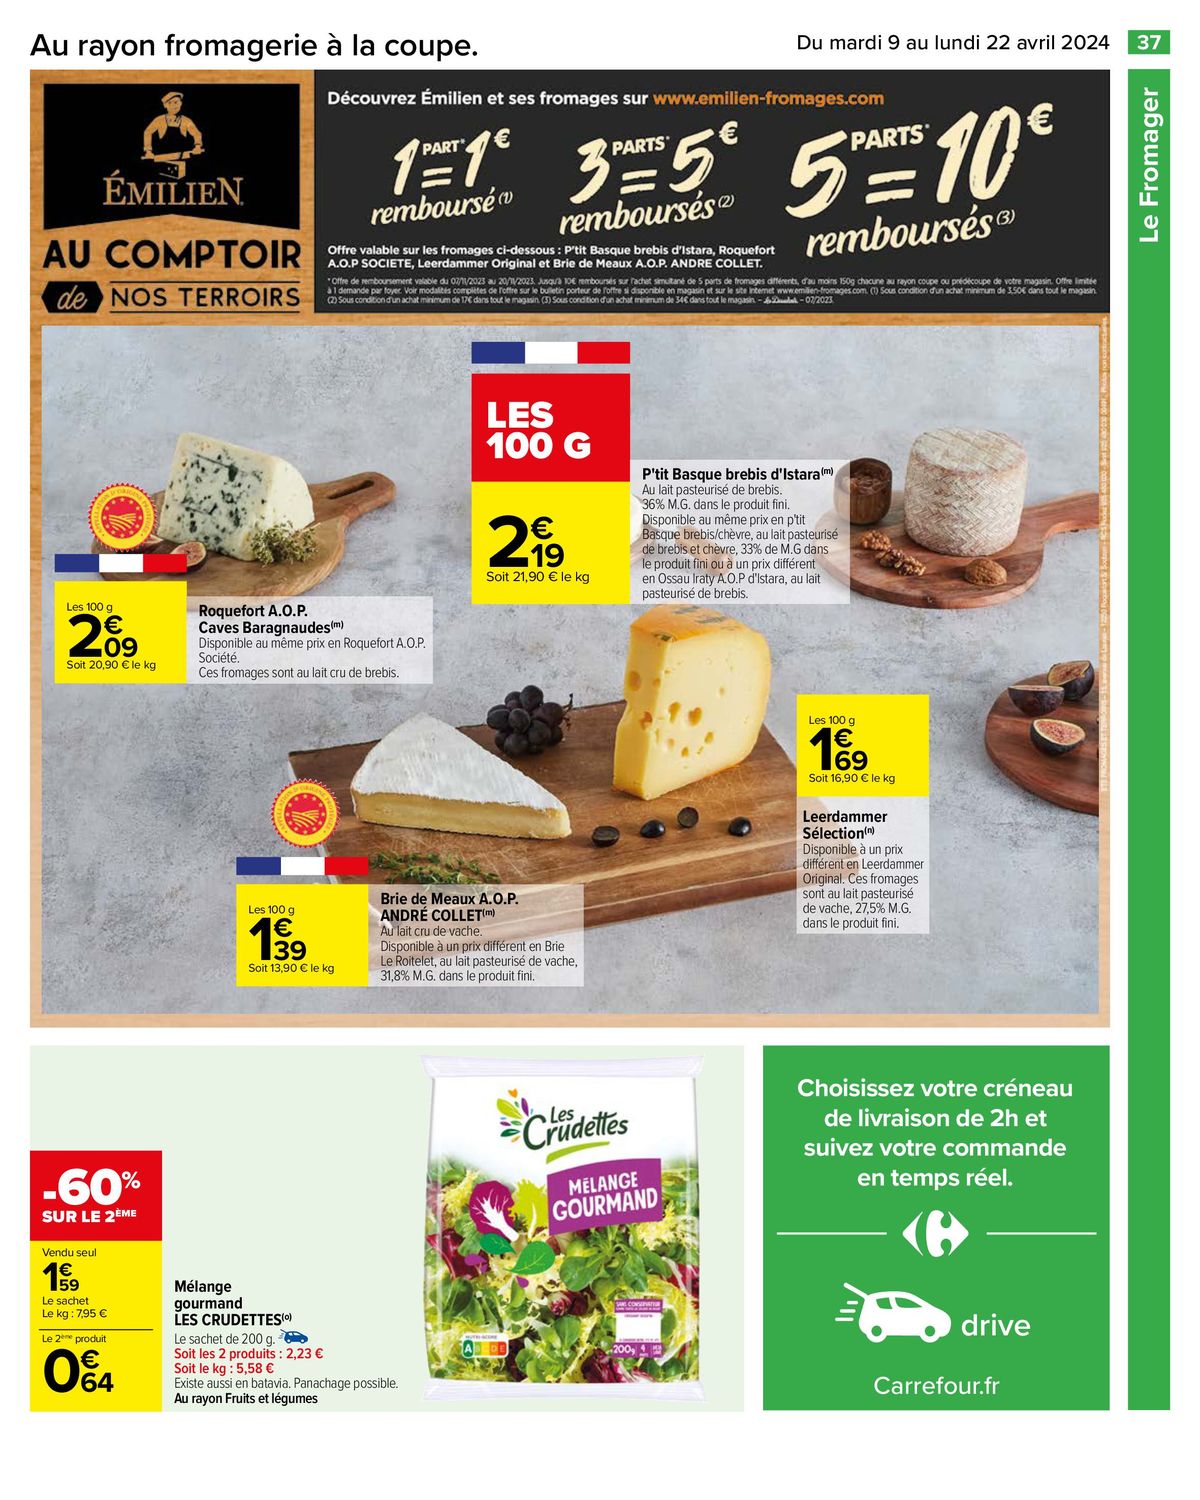 Catalogue OFFERT Carrefour Drive , page 00039